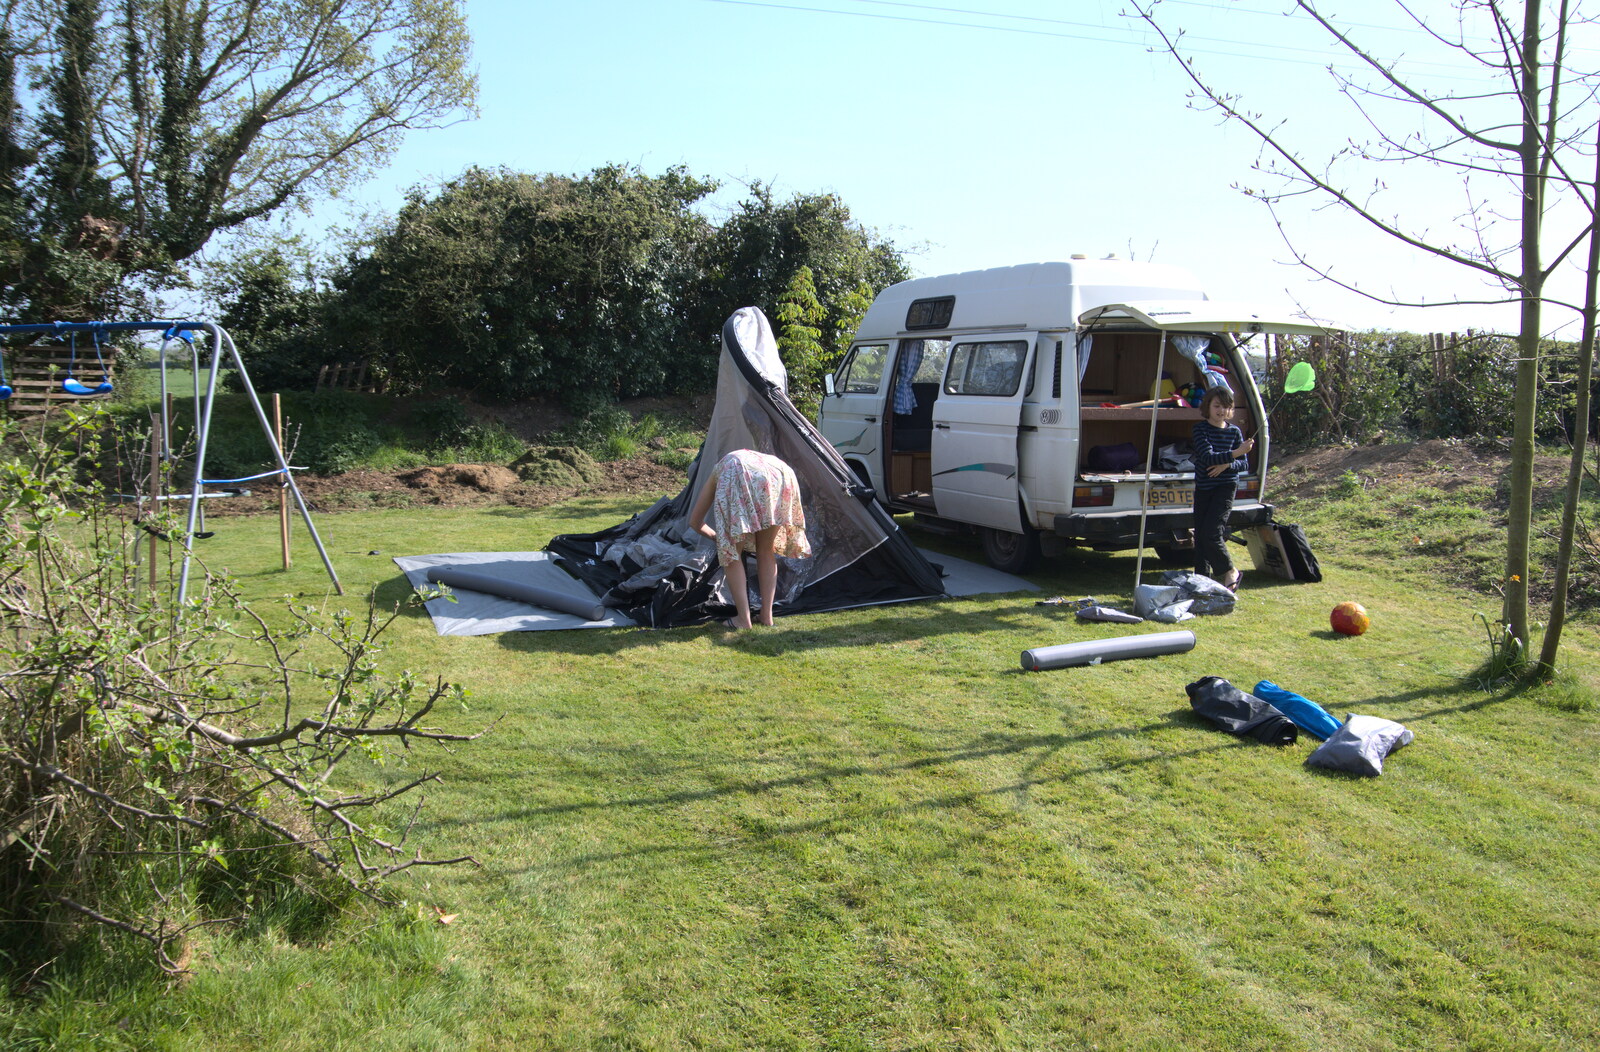 The van is parked at the bottom of the garden from A Weekend Camping Trip in the Garden, Brome, Suffolk - 11th April 2020